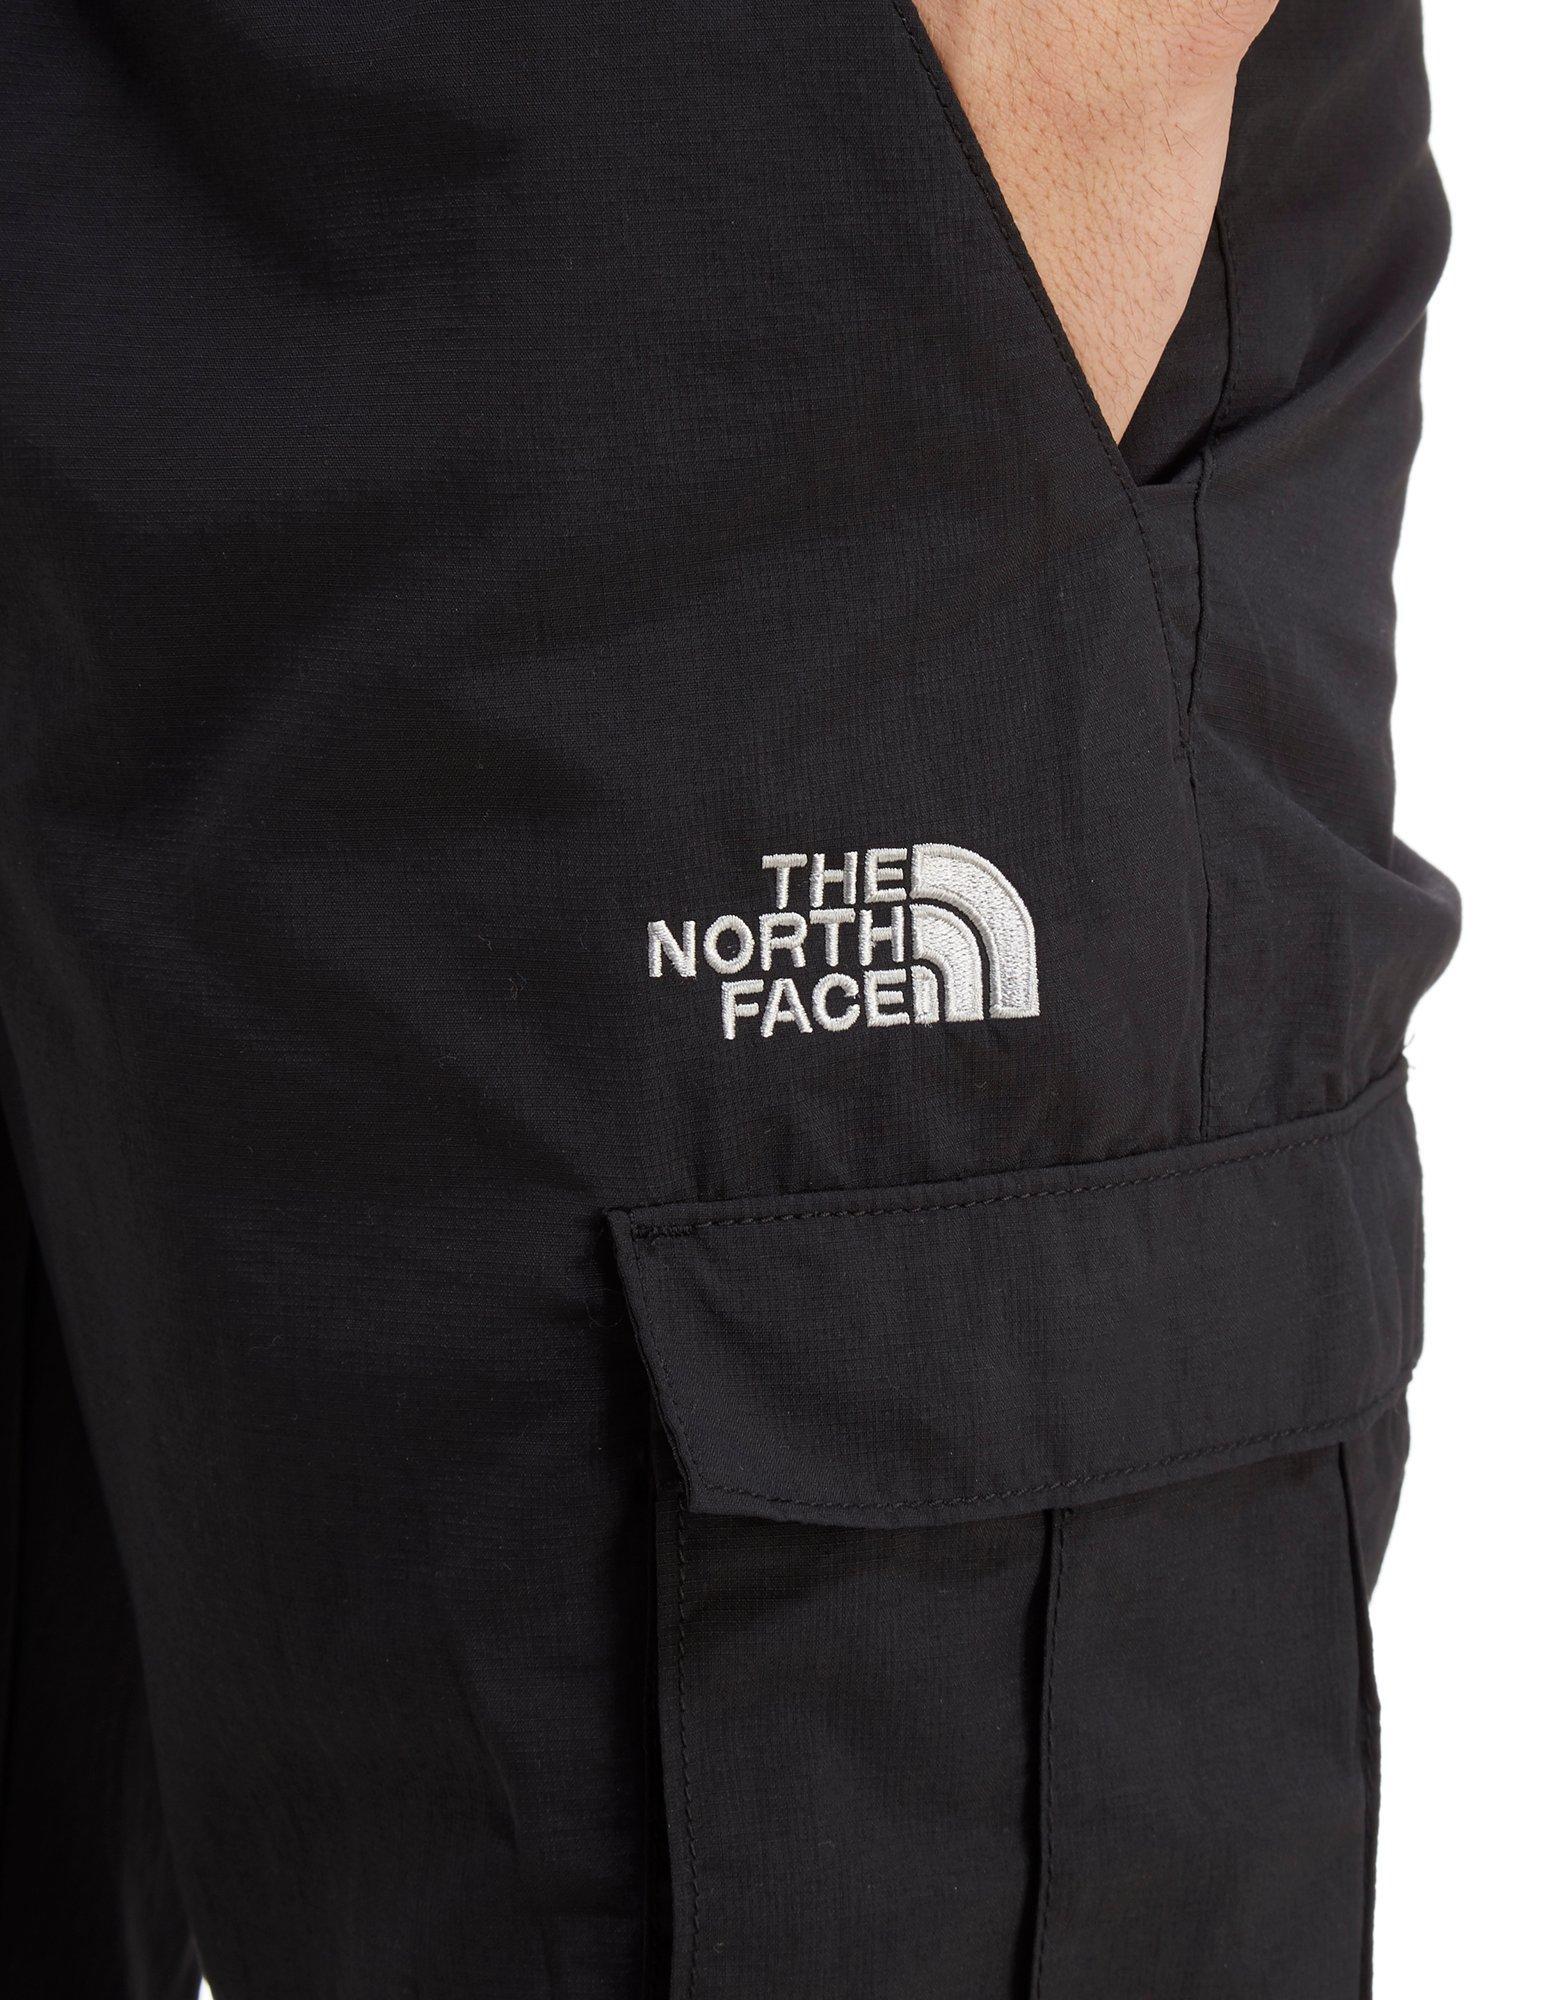 The North Face Synthetic Cargo Pants in Black for Men - Lyst